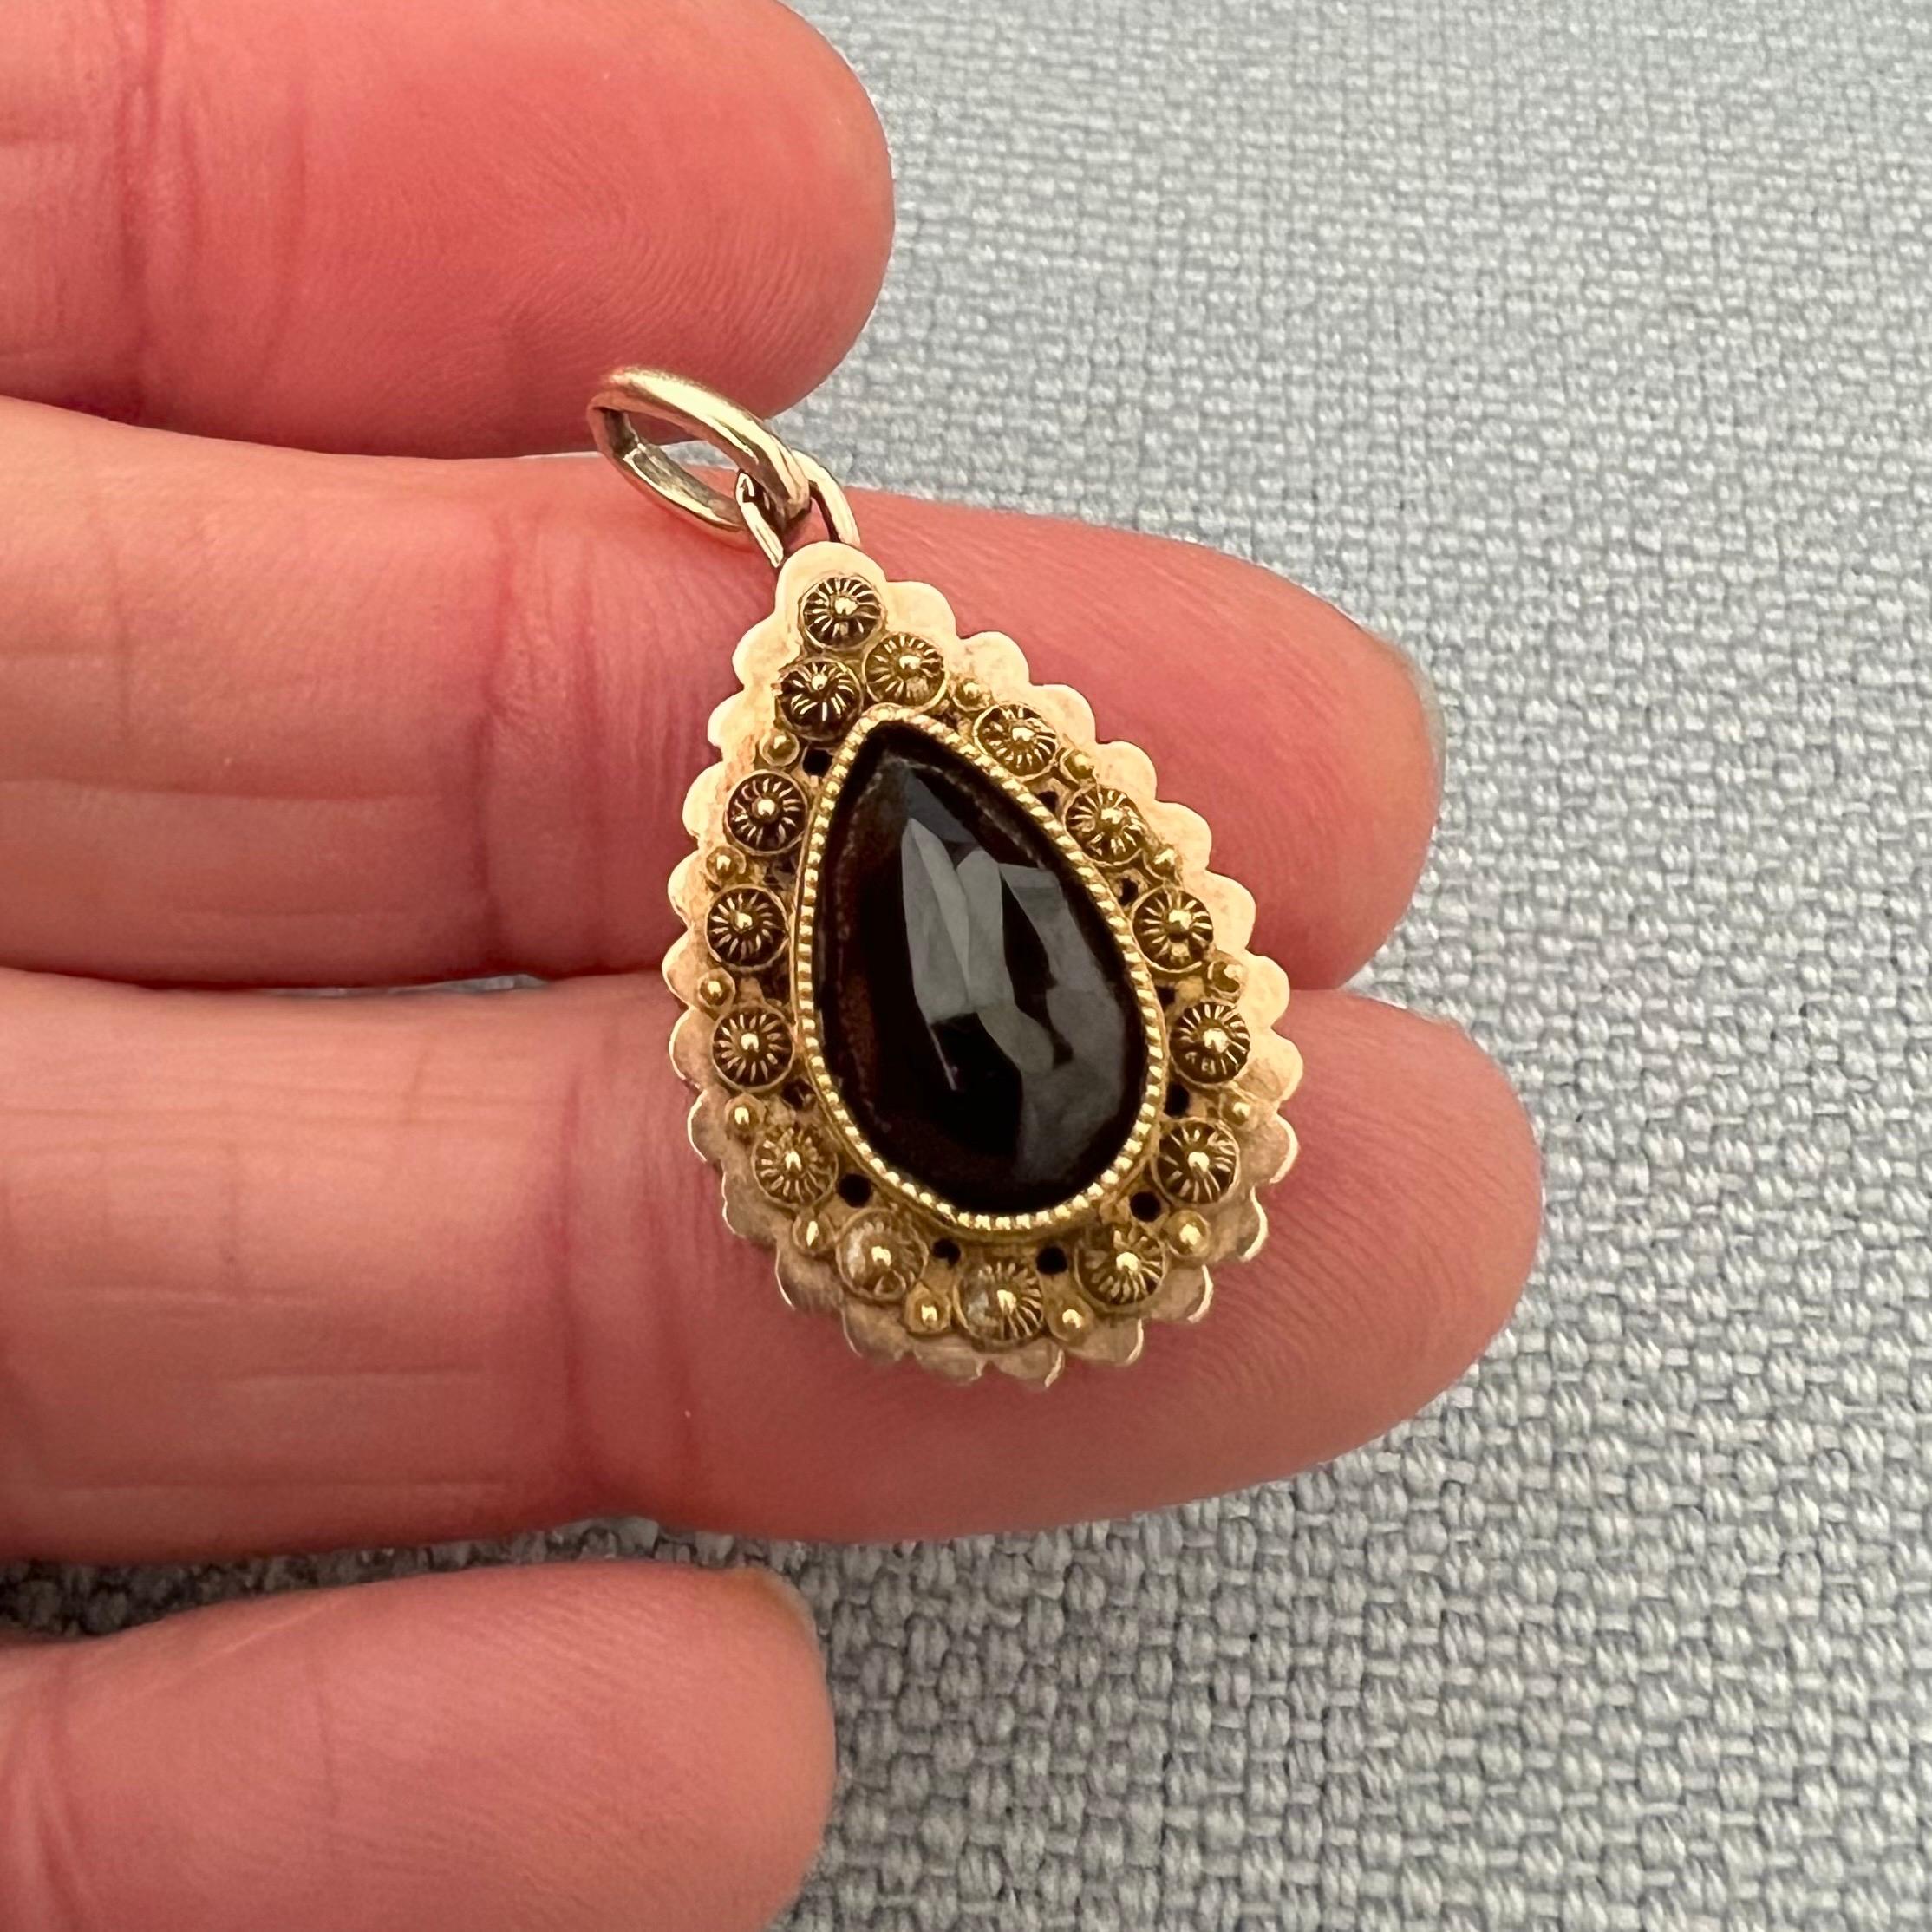 A n antique 9th century gold cannetille work pendant set with a drop shaped faceted garnet stone. The cannetille work is delicately made by hand. In the Netherlands they also call these rosettes 'spiders', there is the spiders body in the center